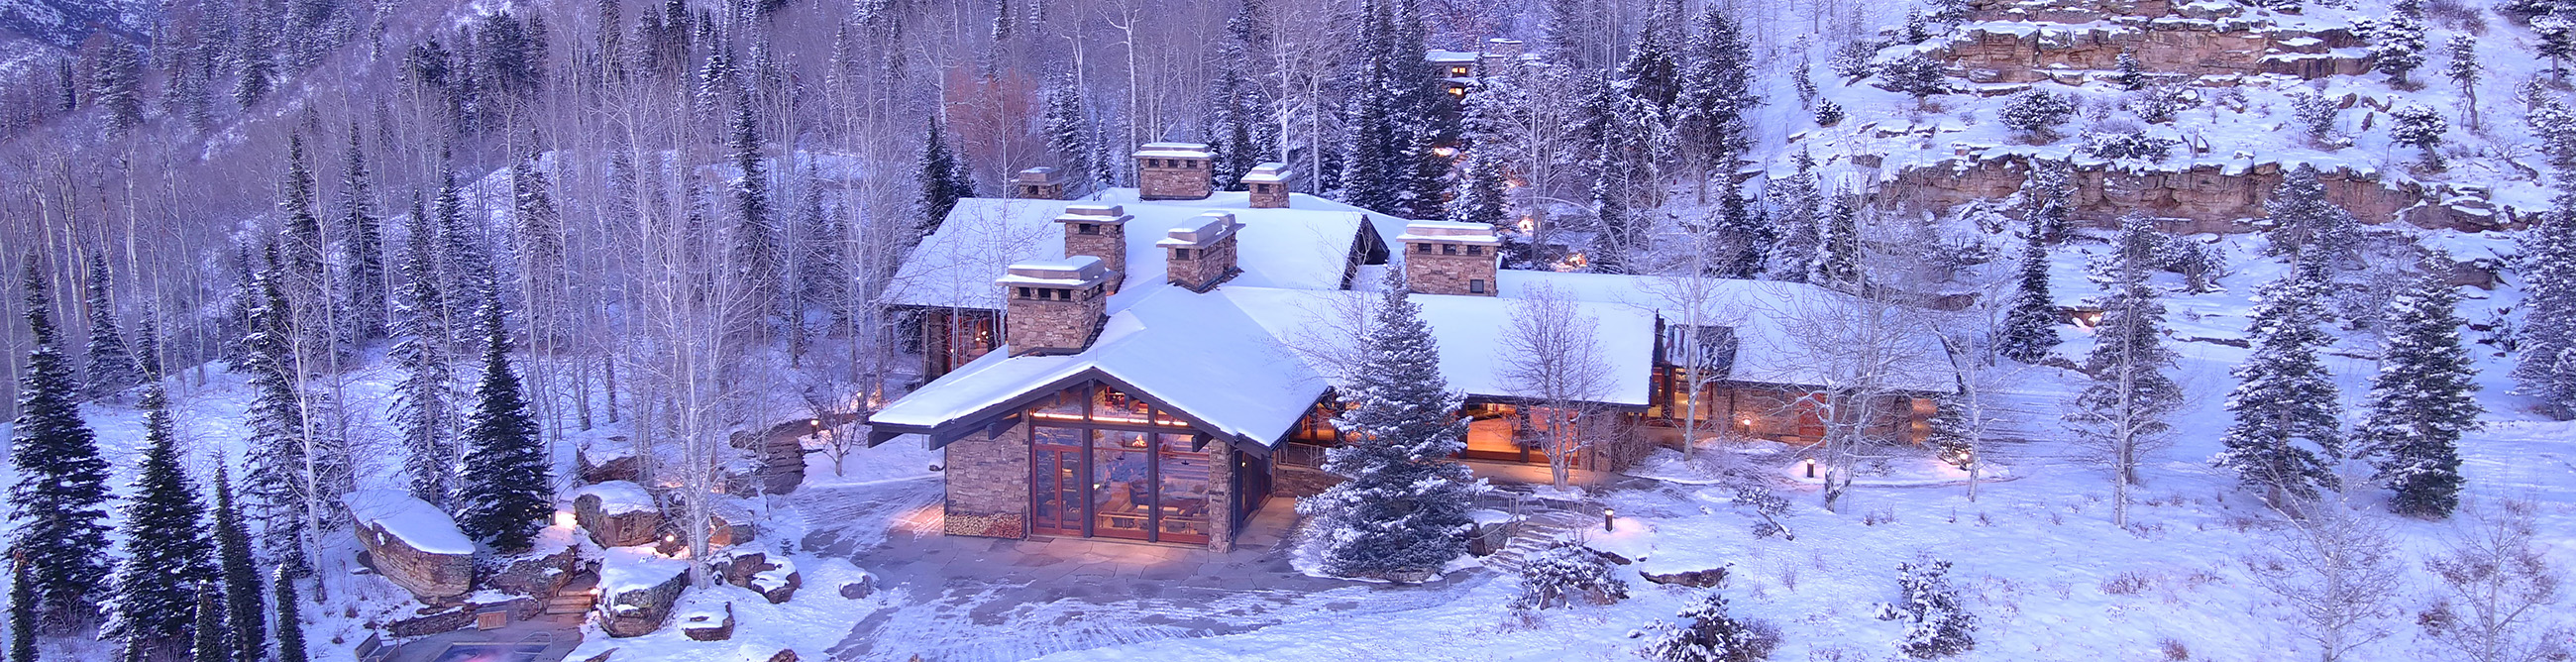 A house for sale in Aspen, Colo.